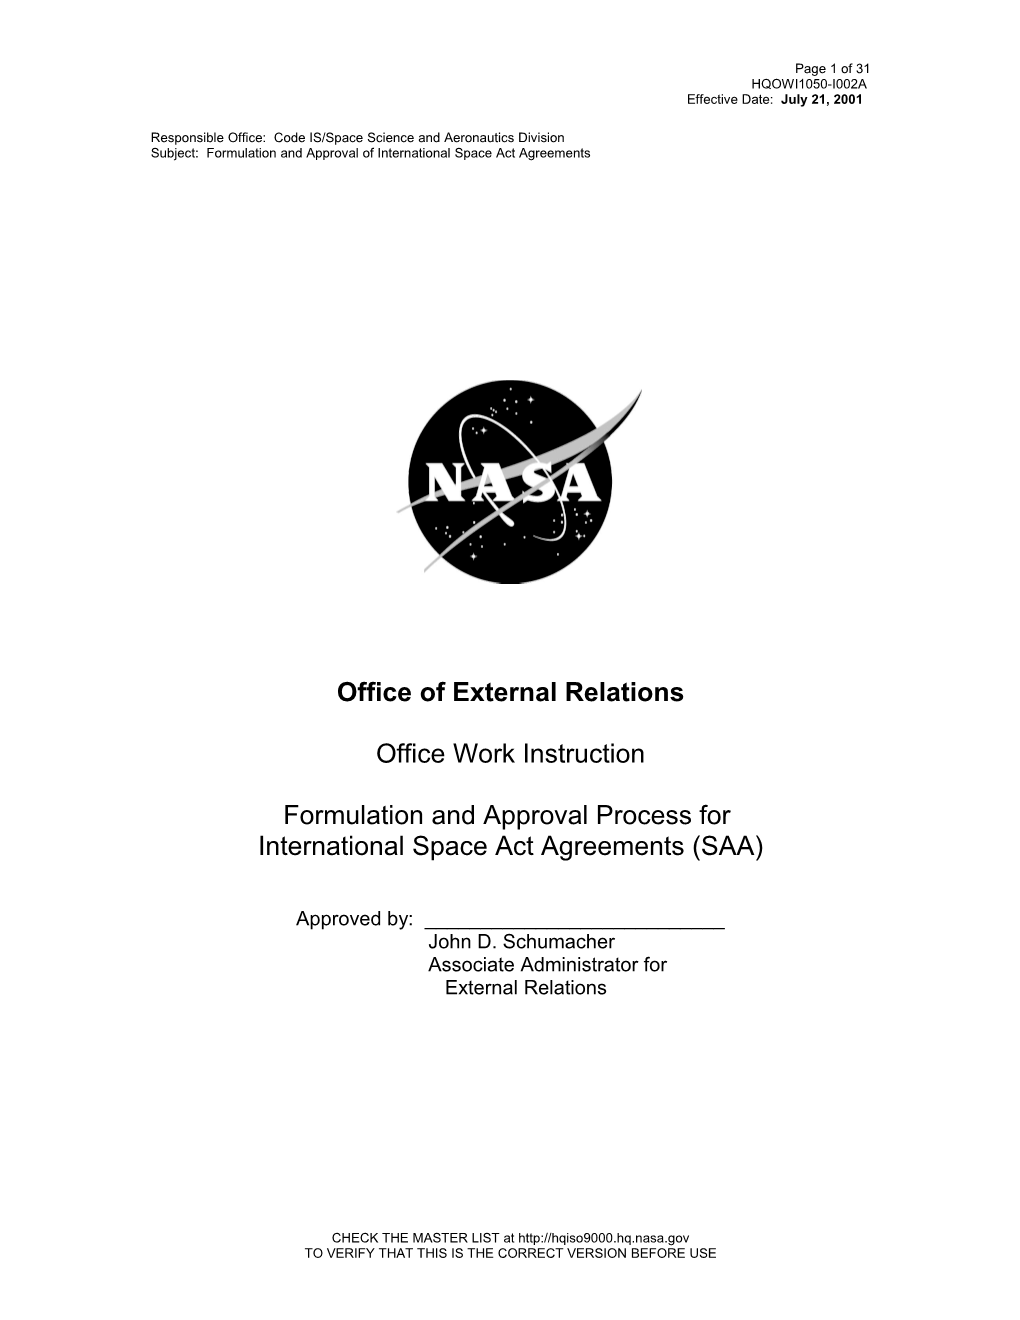 Responsible Office: Code IS/Space Science and Aeronautics Division